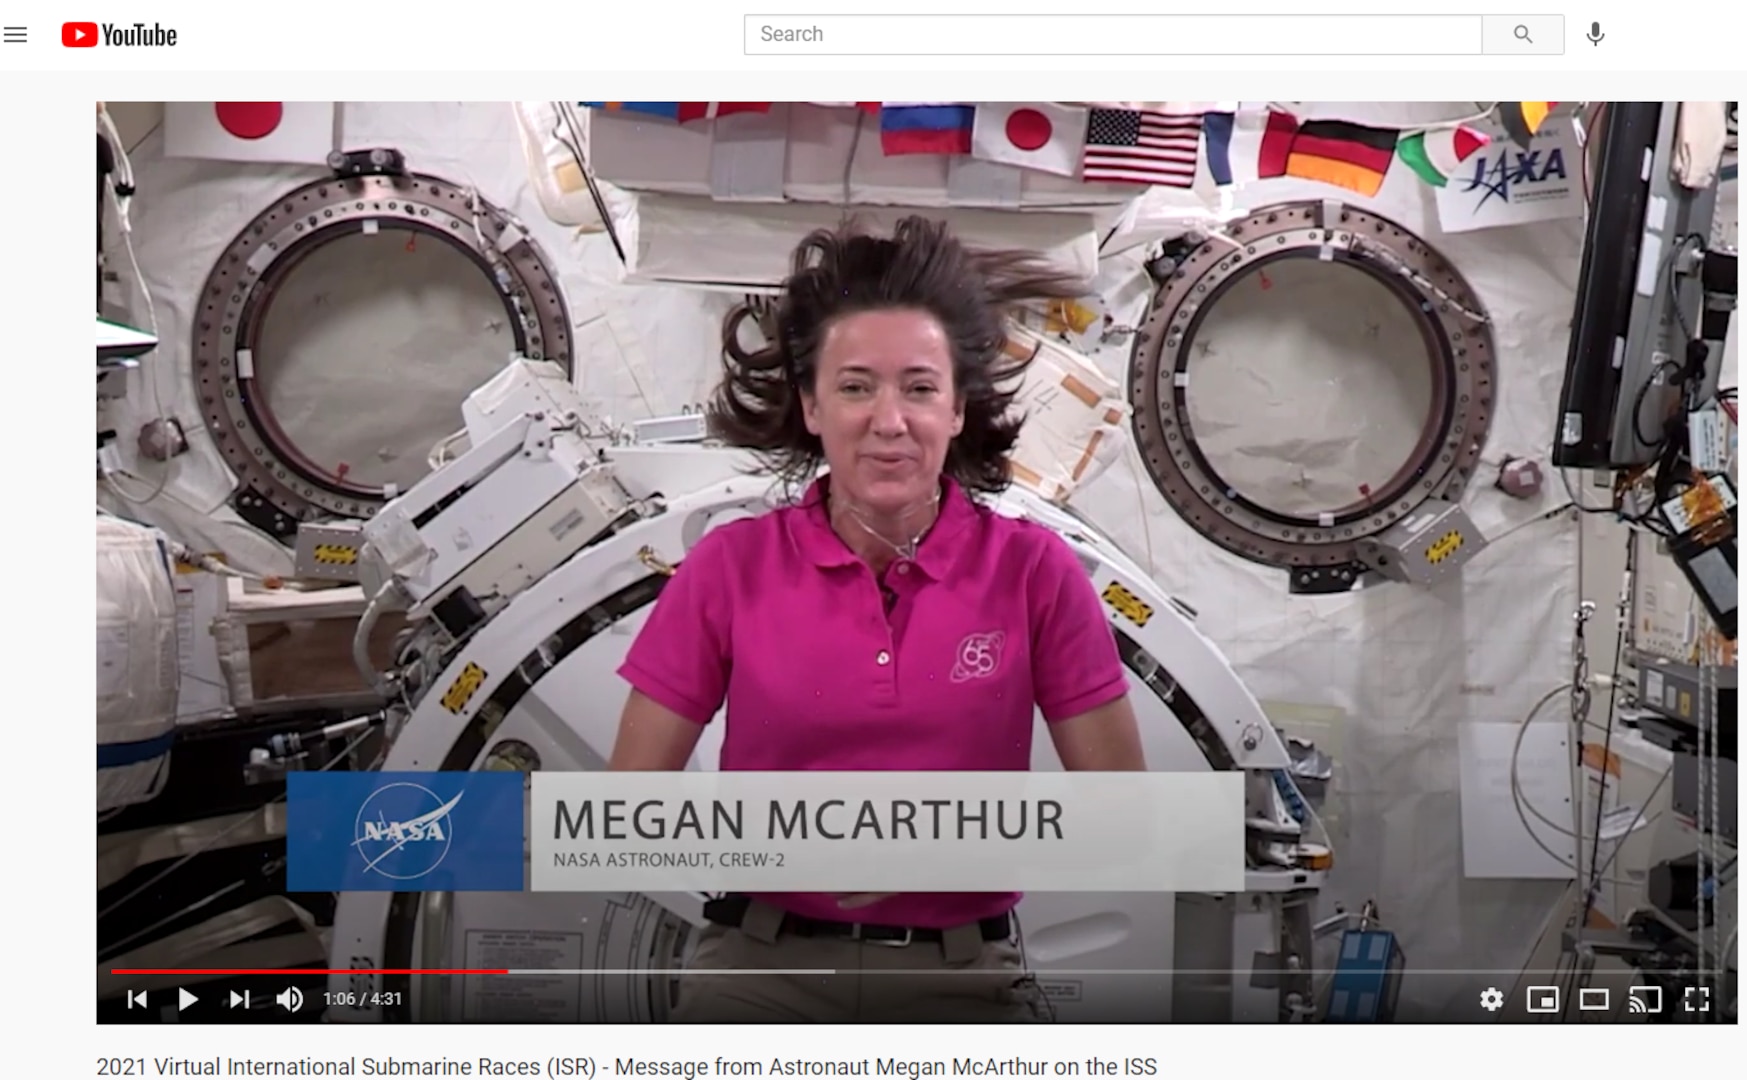 Astronaut Megan McArthur gives a pep talk in a video from the International Space Station to students participating in the 16th International Submarine Races in June 2021.